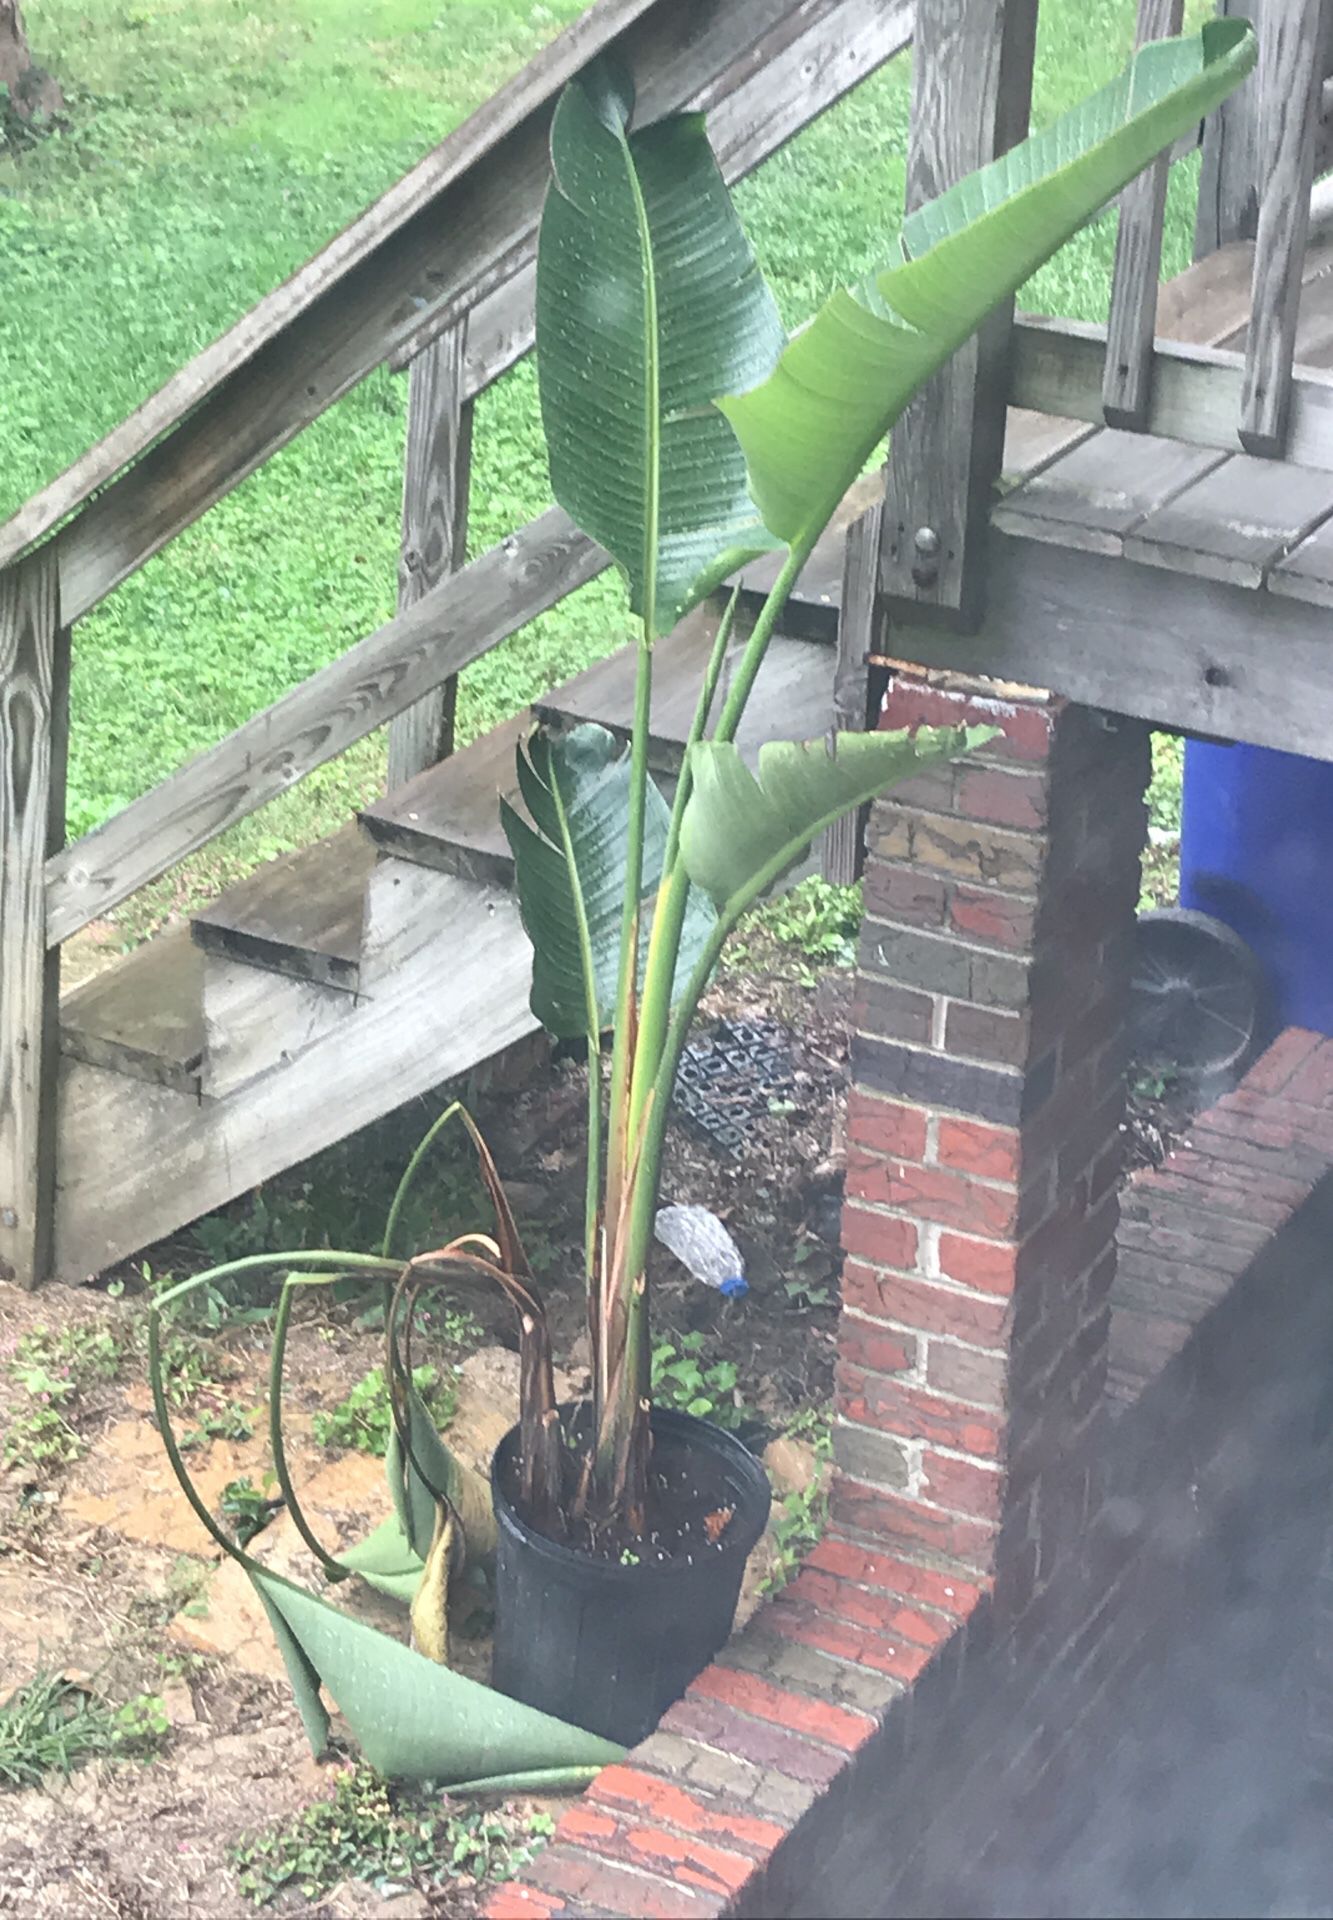 Free live houseplant in bad condition